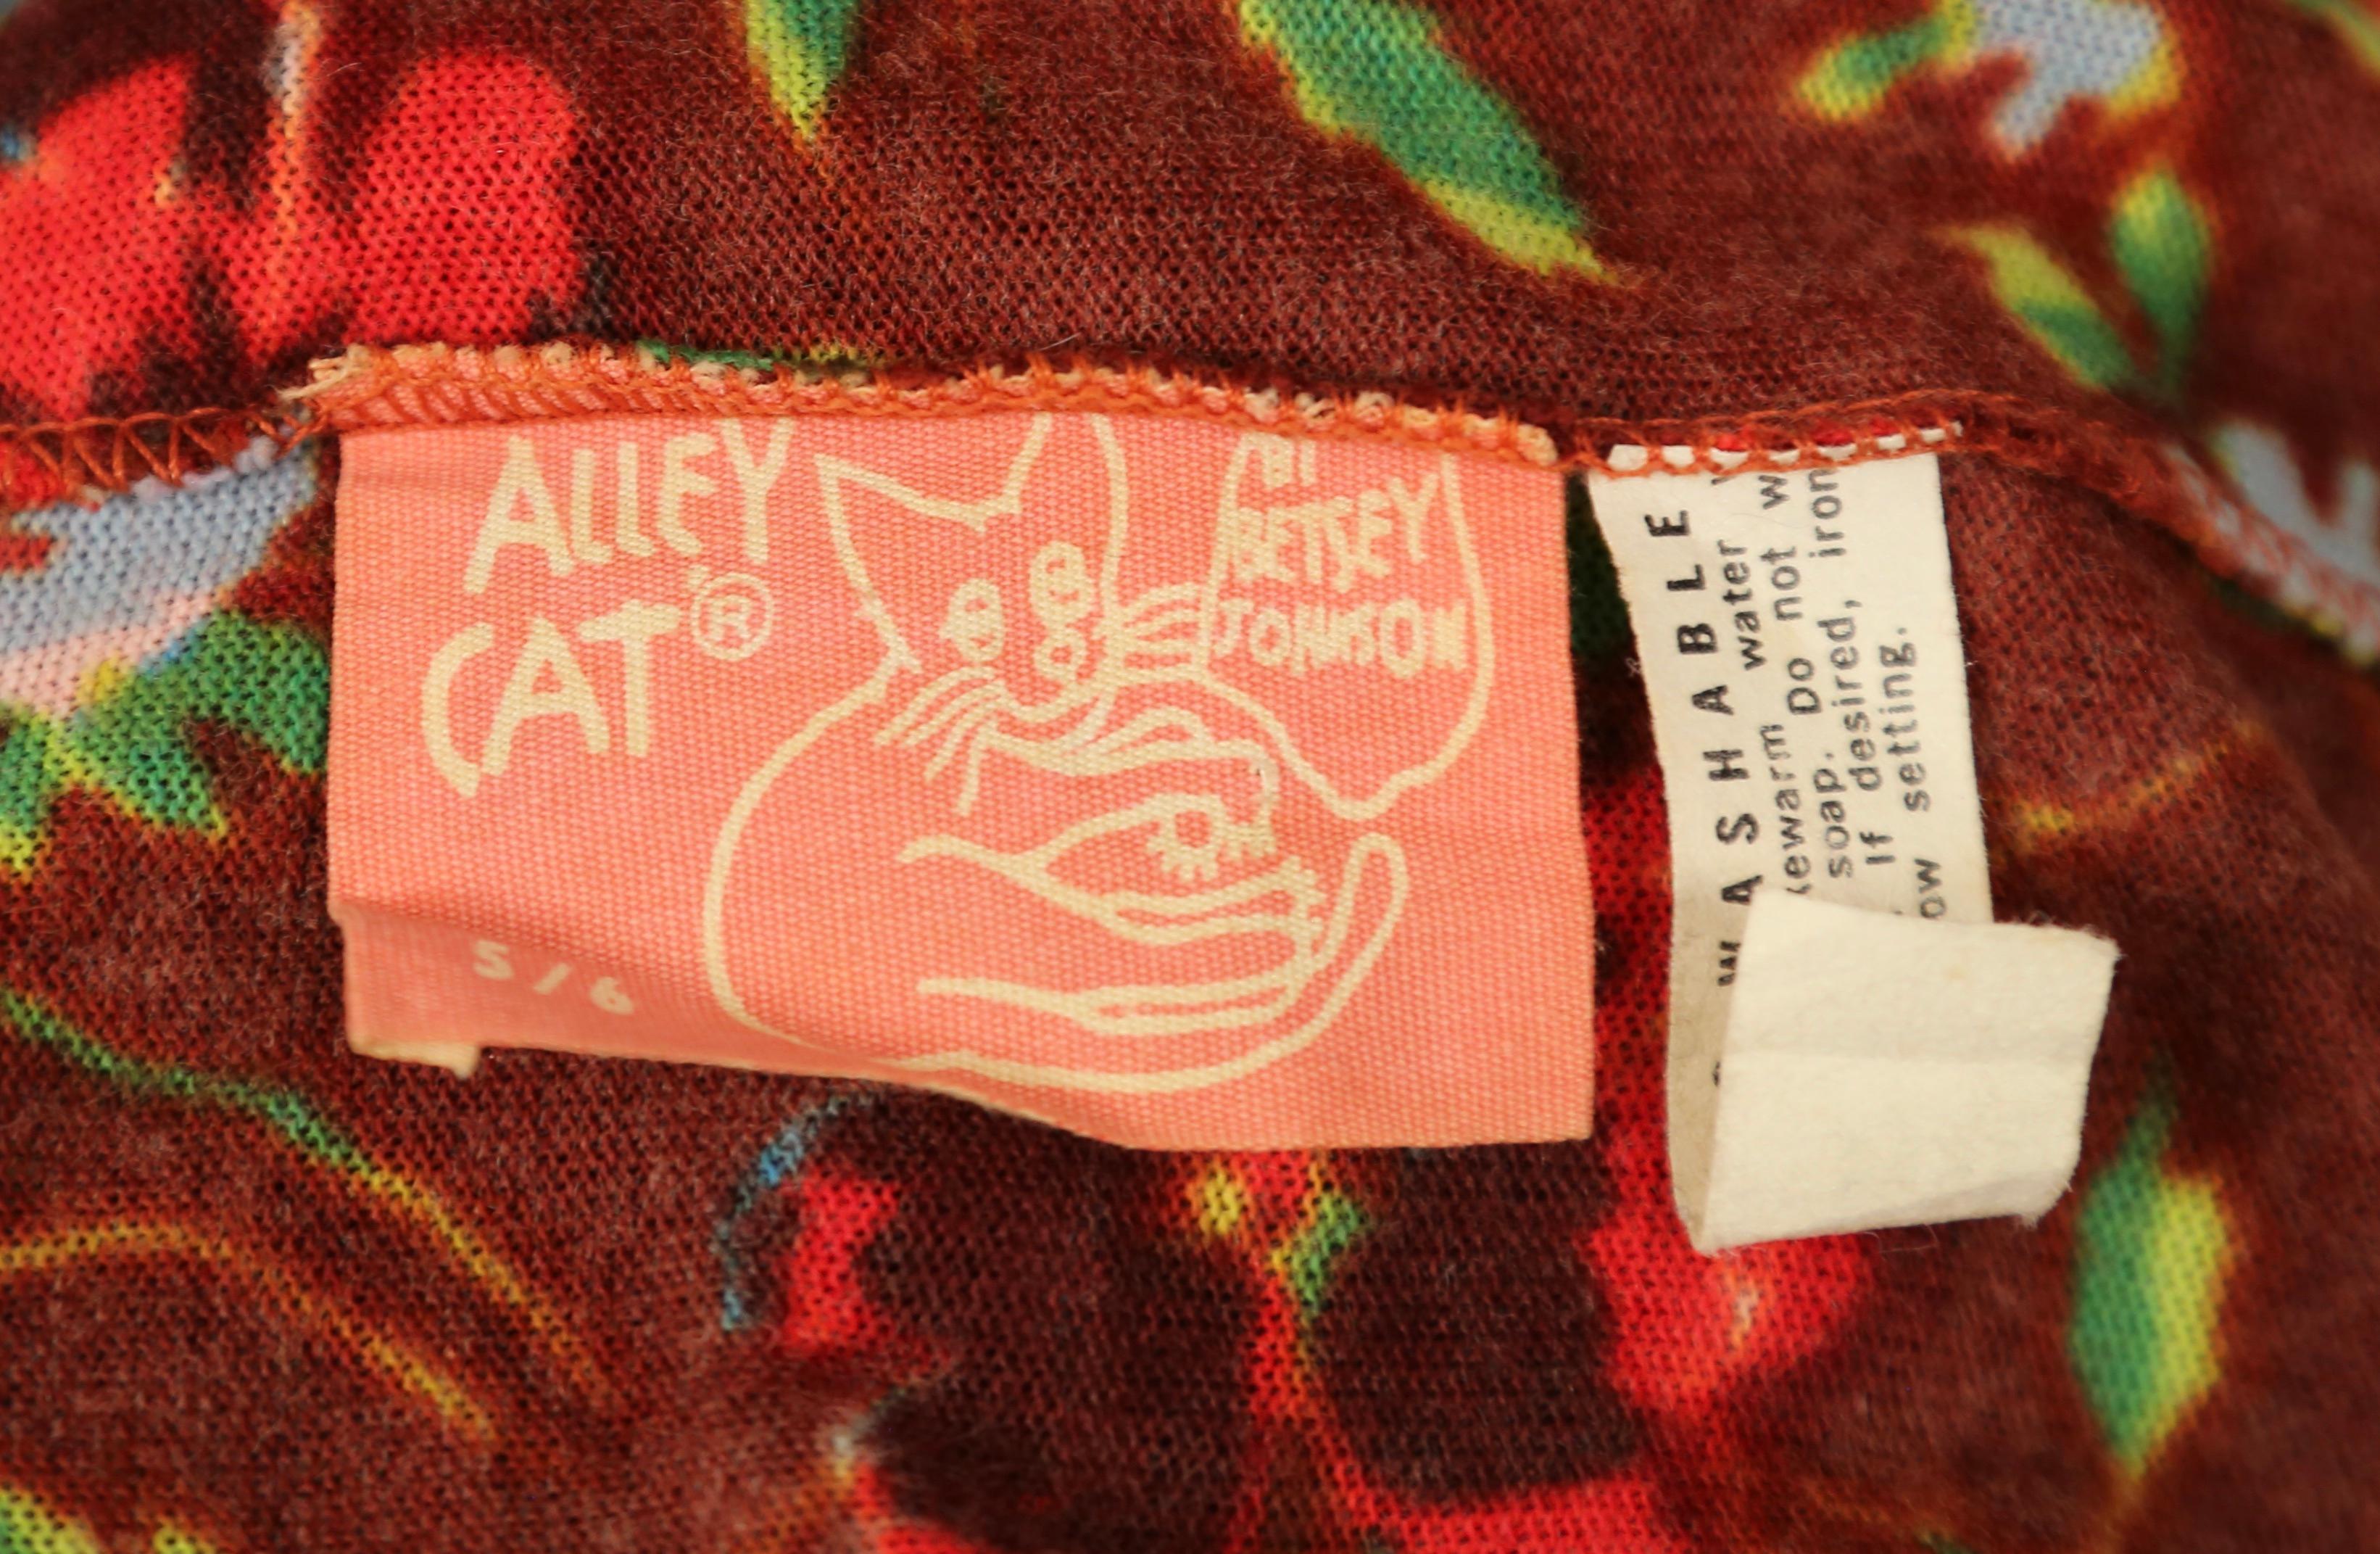 1970's ALLEY CAT by BETSEY JOHNSON floral dress 4